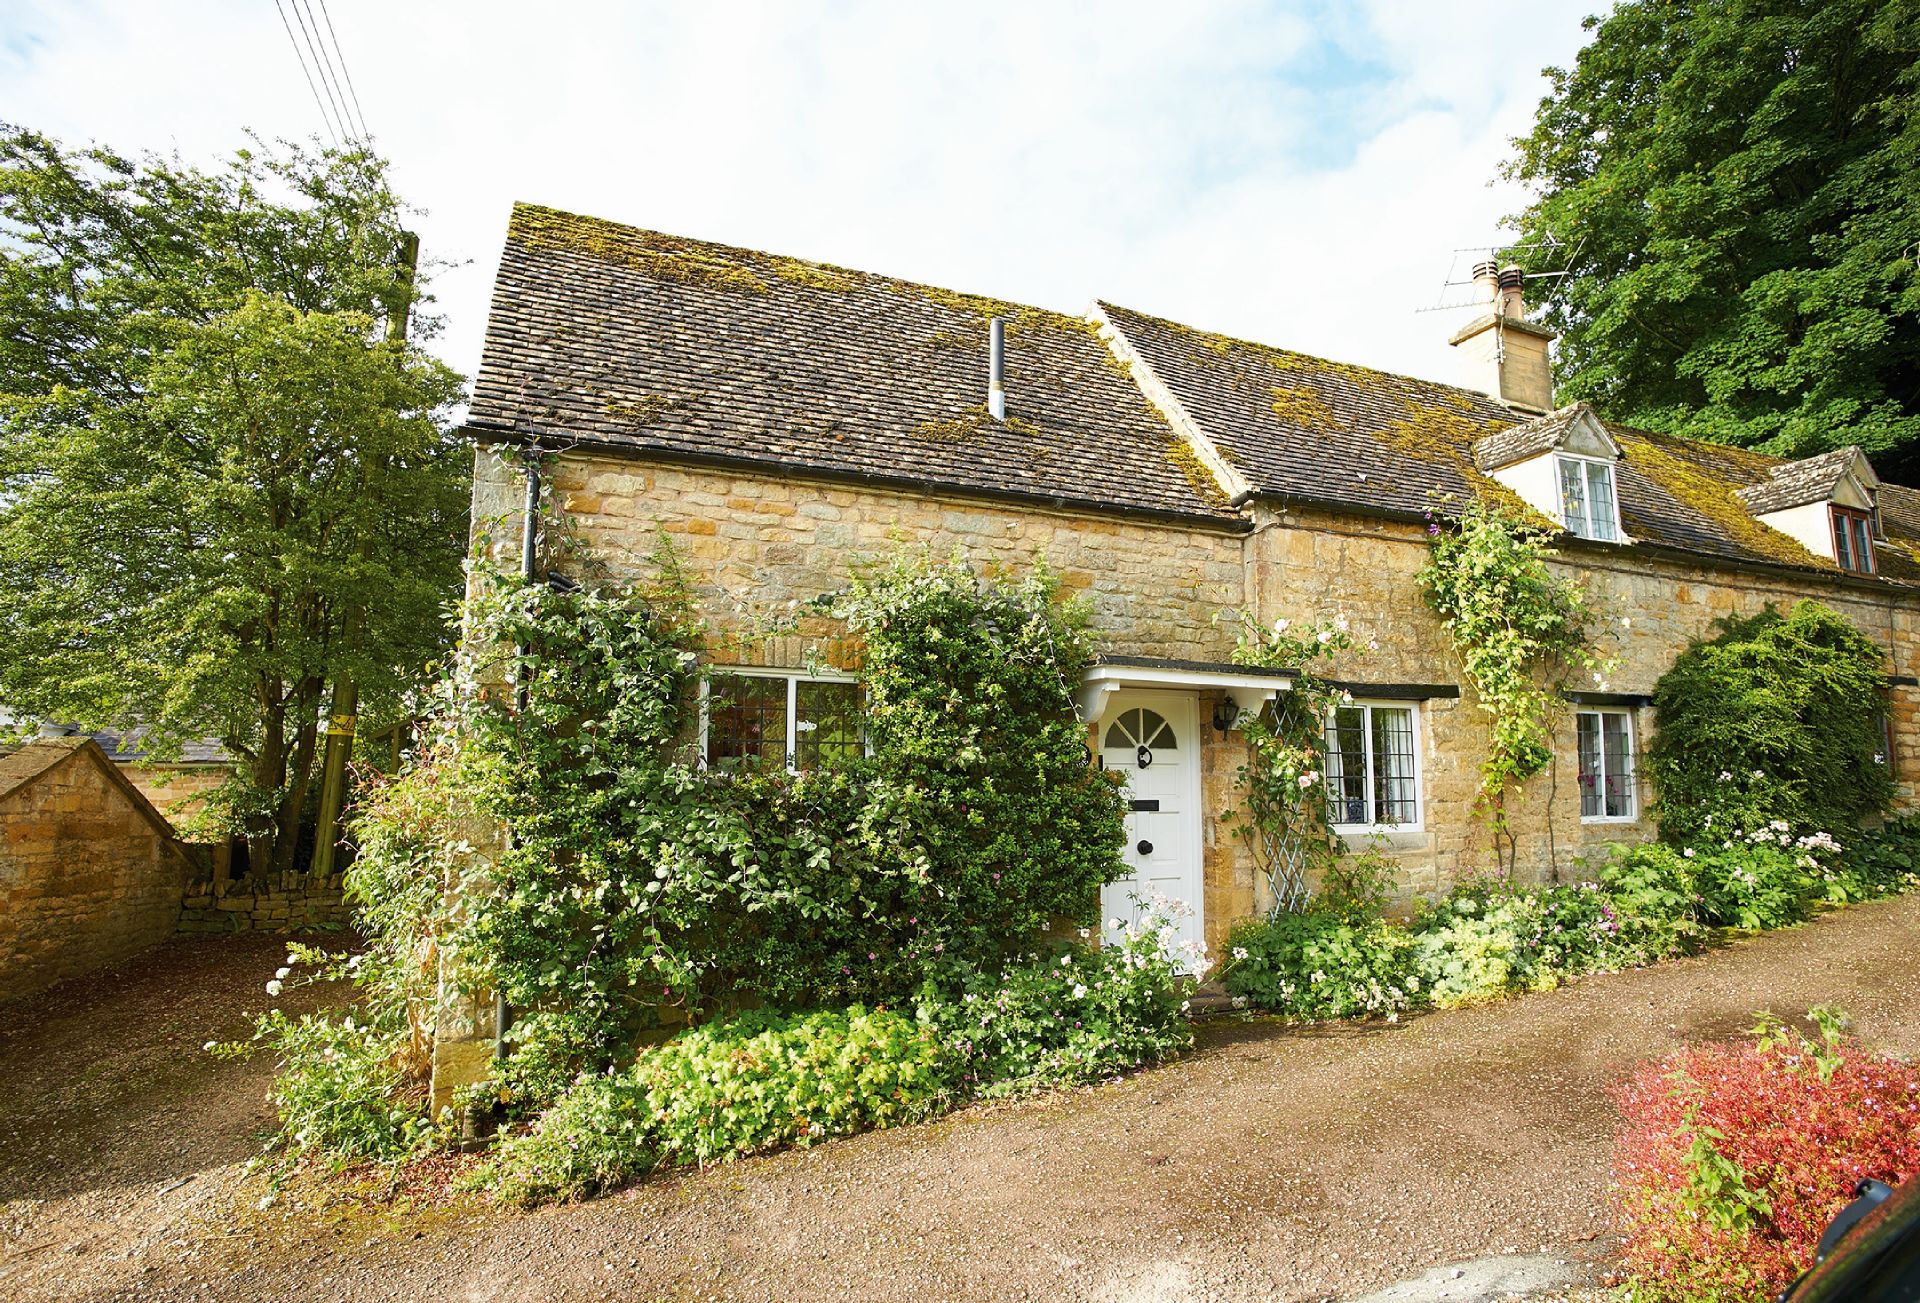 More information about Keytes Cottage - ideal for a family holiday